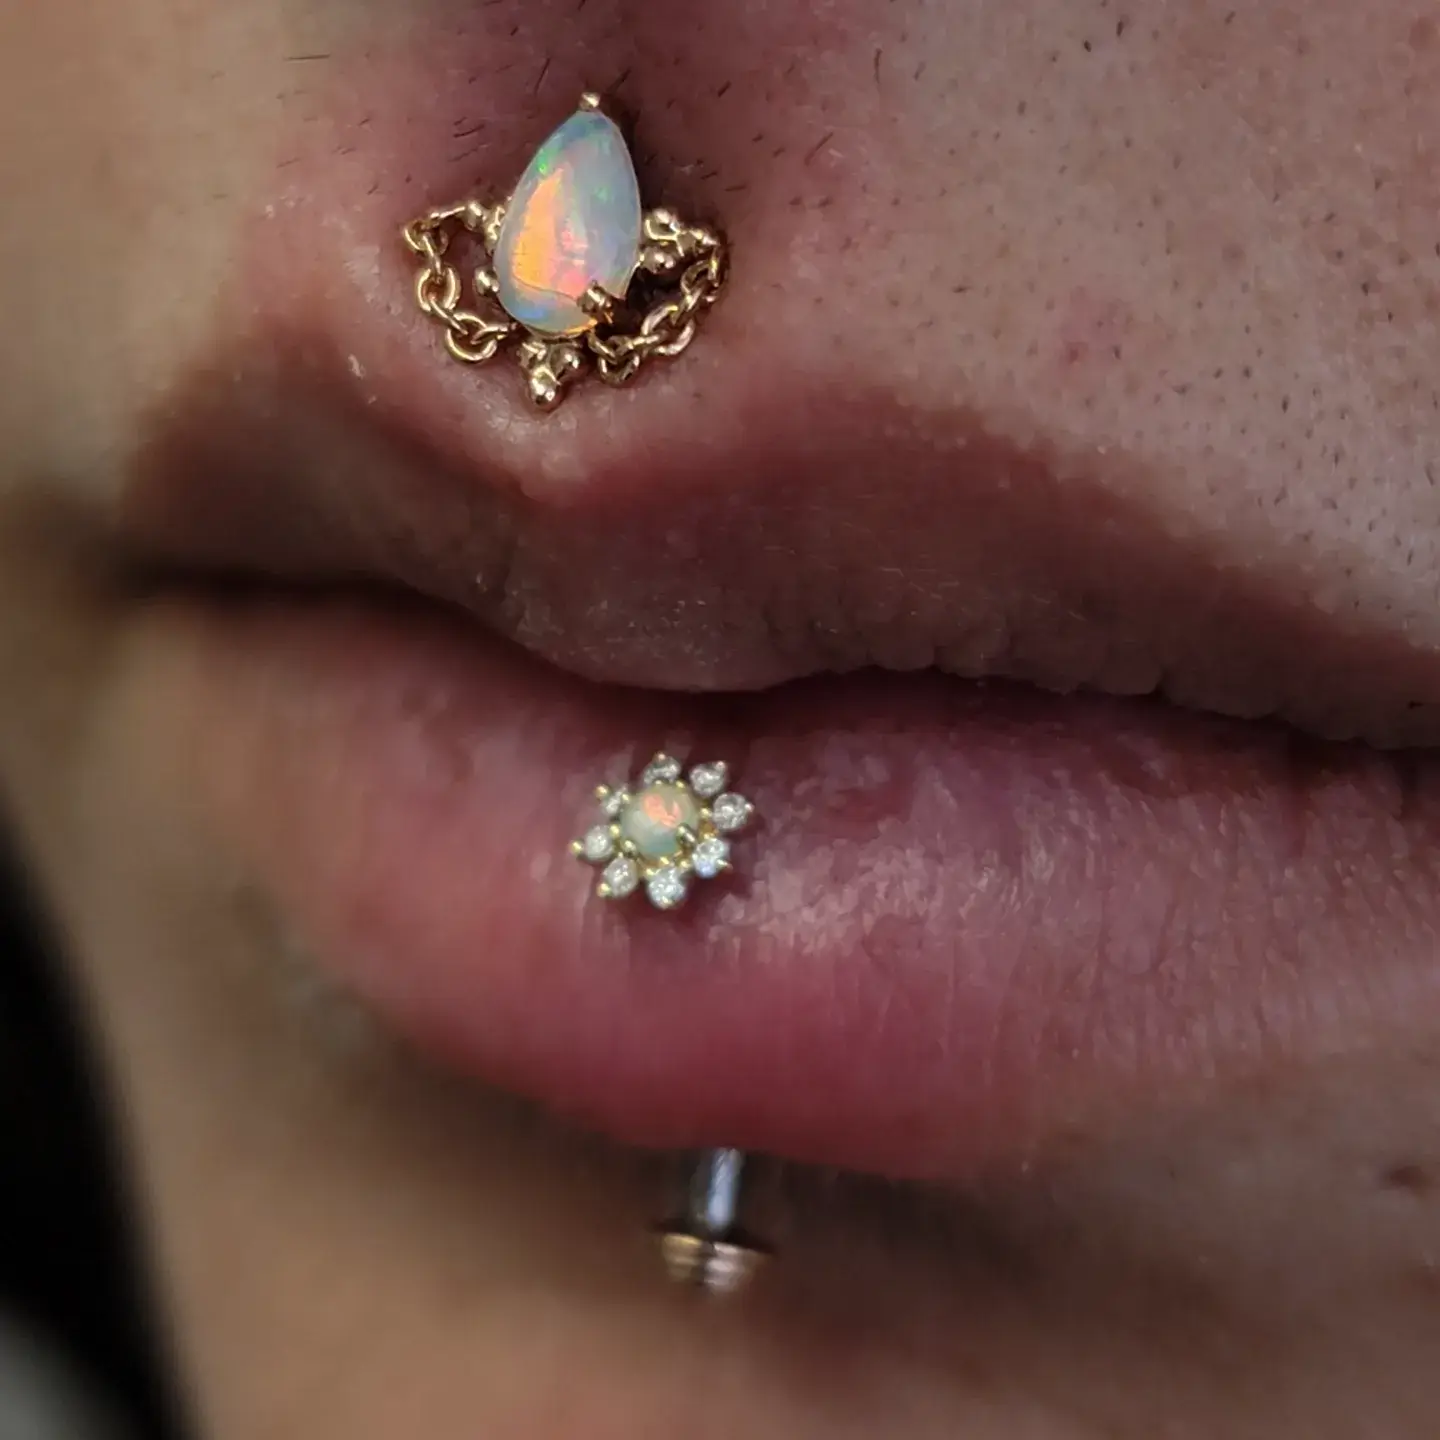 Piercings not done here, jewelry upgraded to a mix of yellow and rose gold with genuine diamonds and opal.